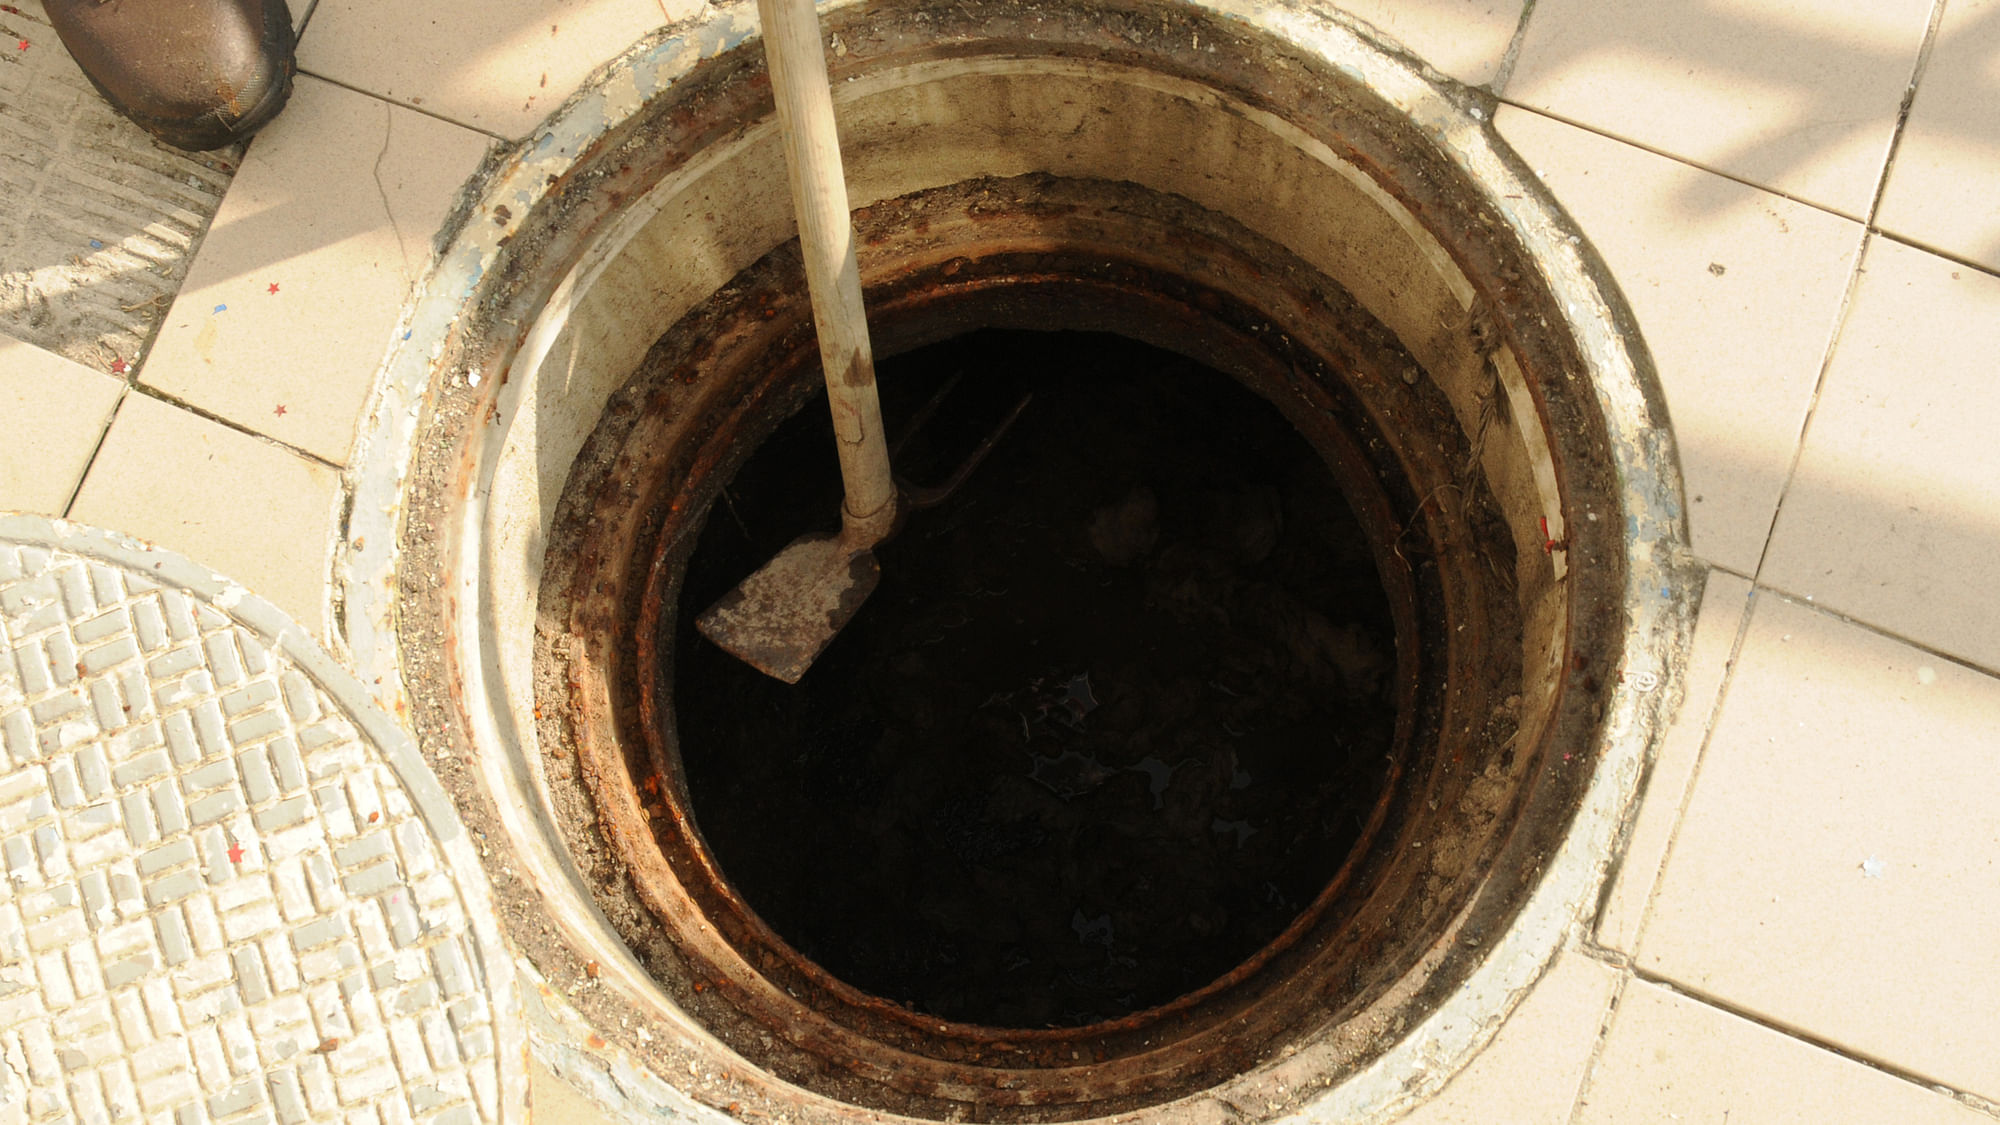 Manual scavenging has been banned by the Supreme Court. Image used for representation.